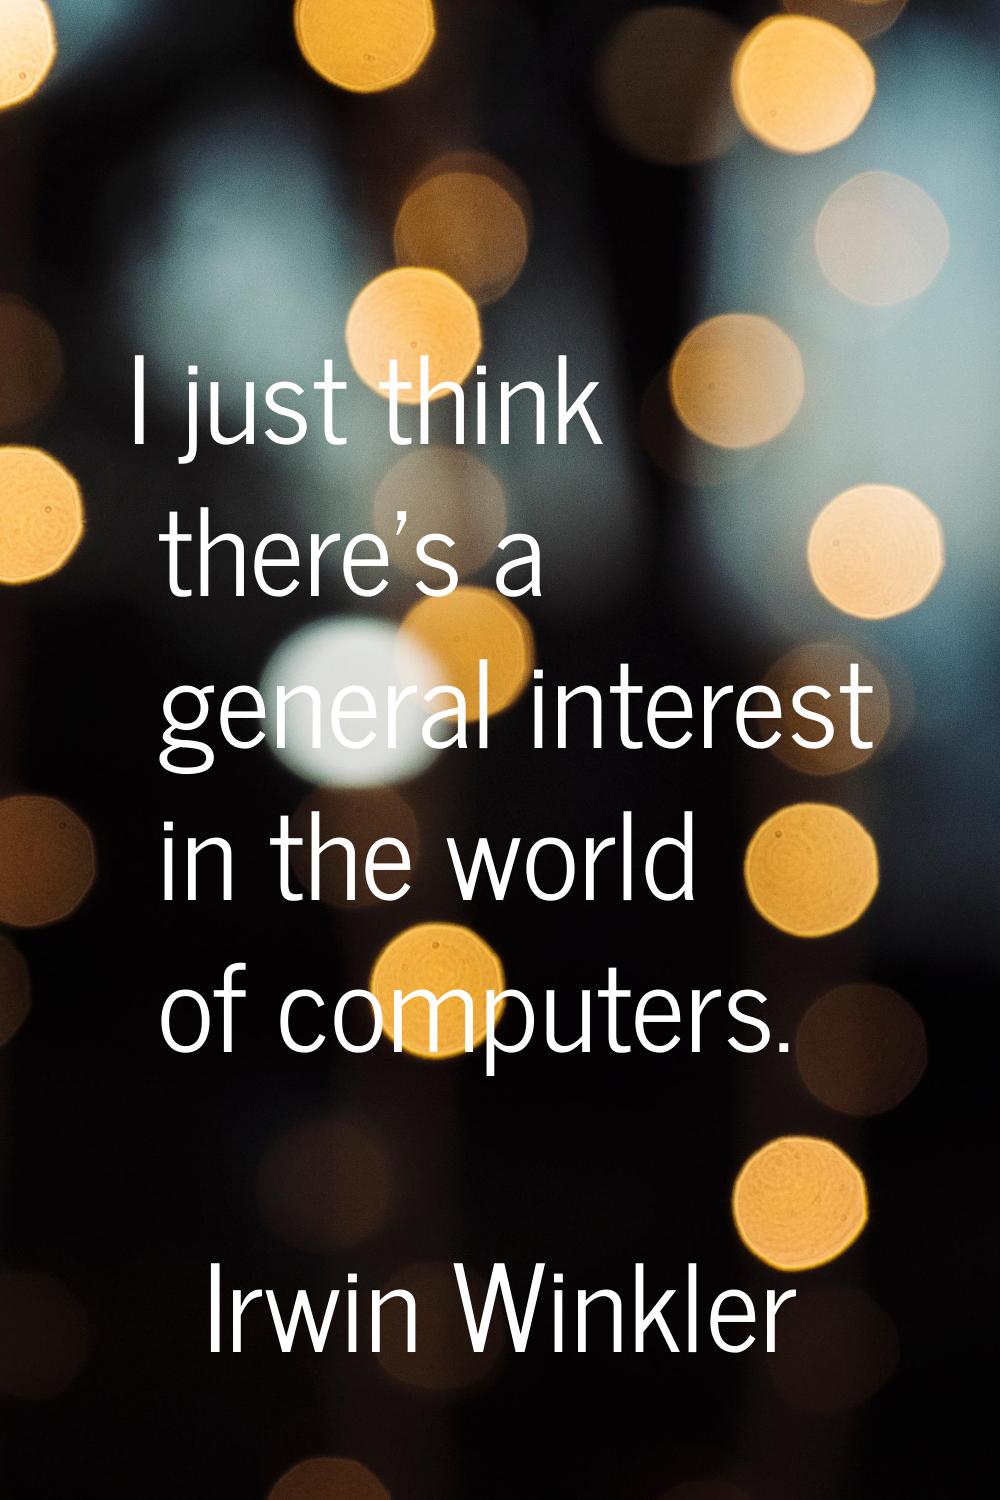 I just think there's a general interest in the world of computers.